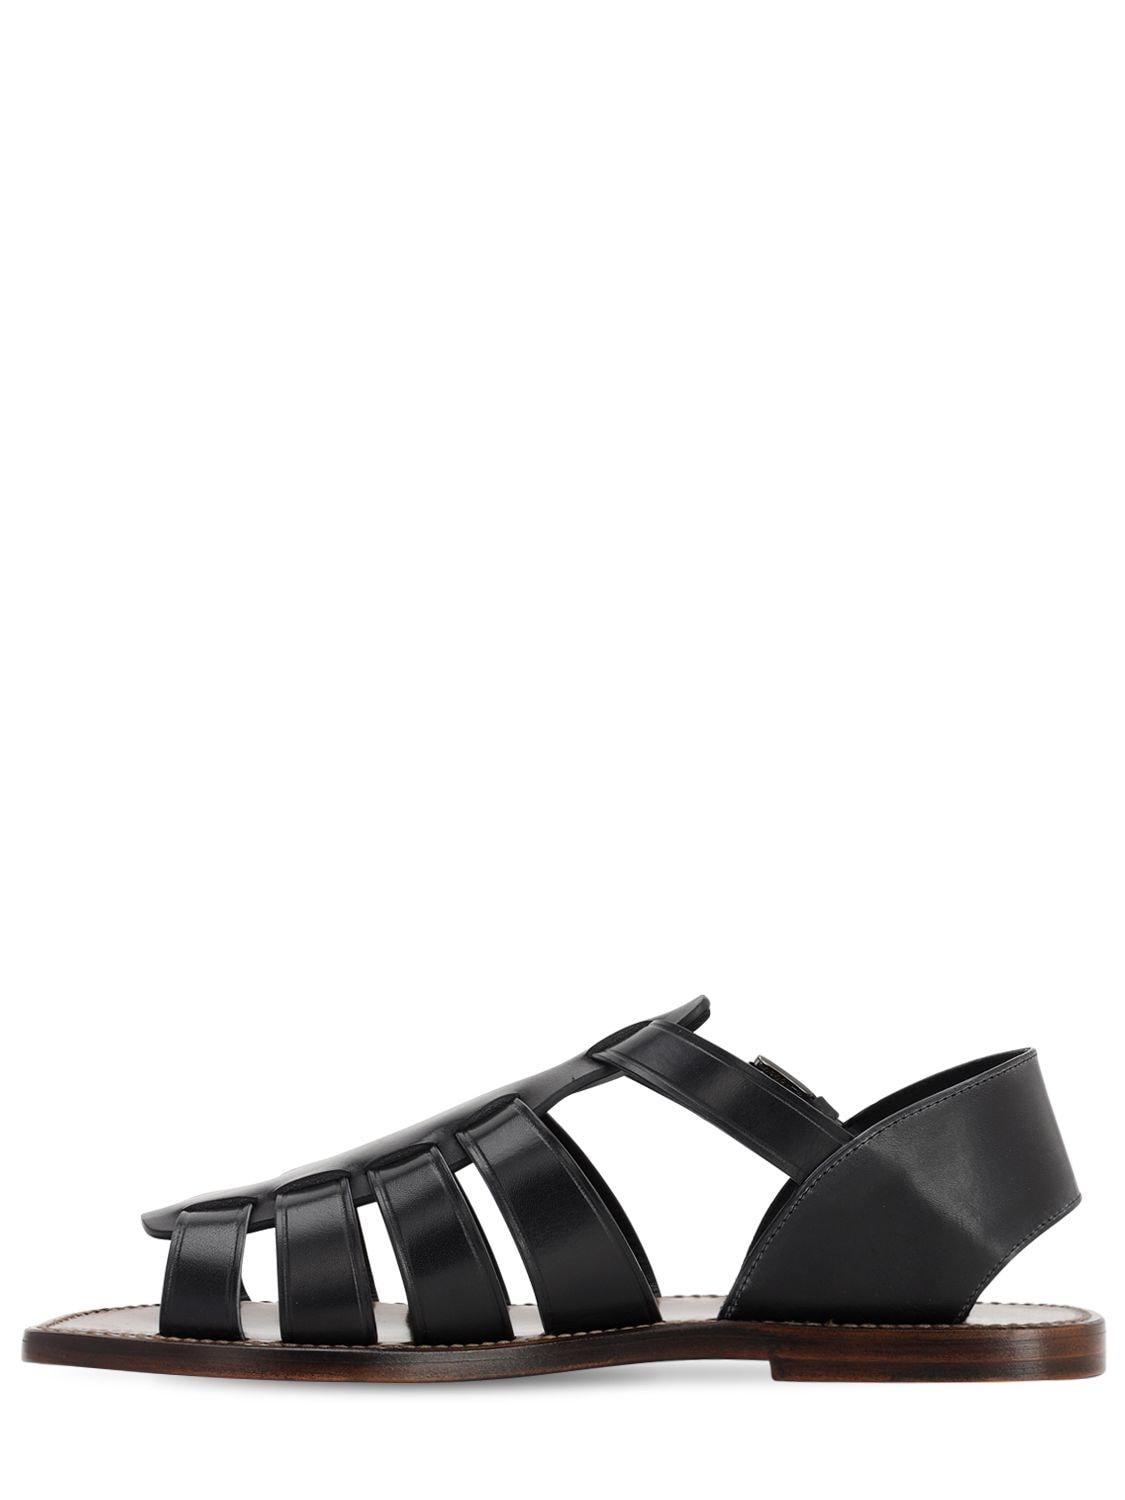 Silvano Sassetti 15mm Leather Sandals in Black for Men - Save 36% - Lyst